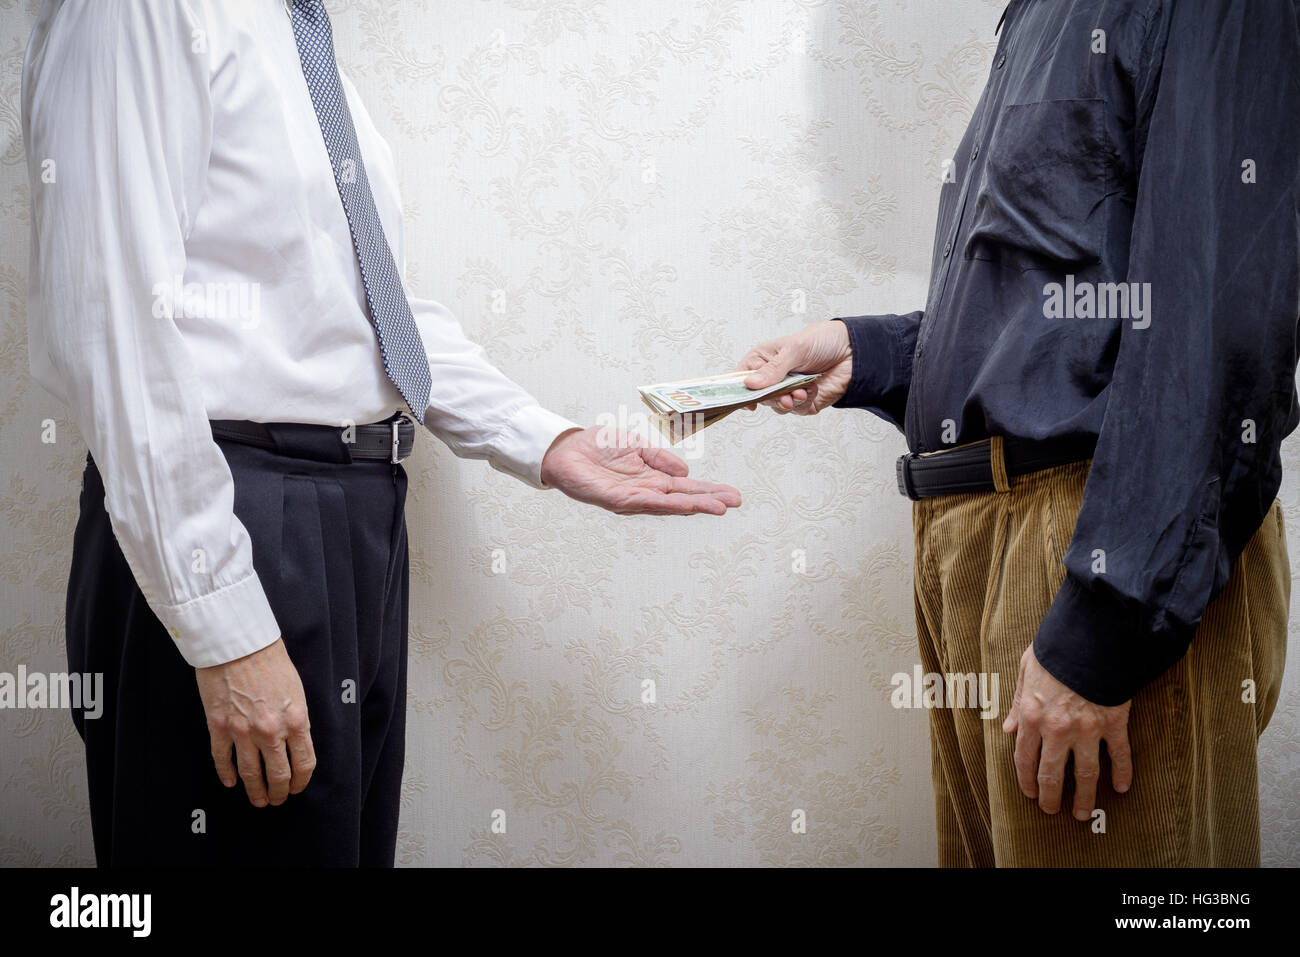 Corrupted man paying a Dollars banknotes bribe to a businessman, or politician, accepting corruption Stock Photo